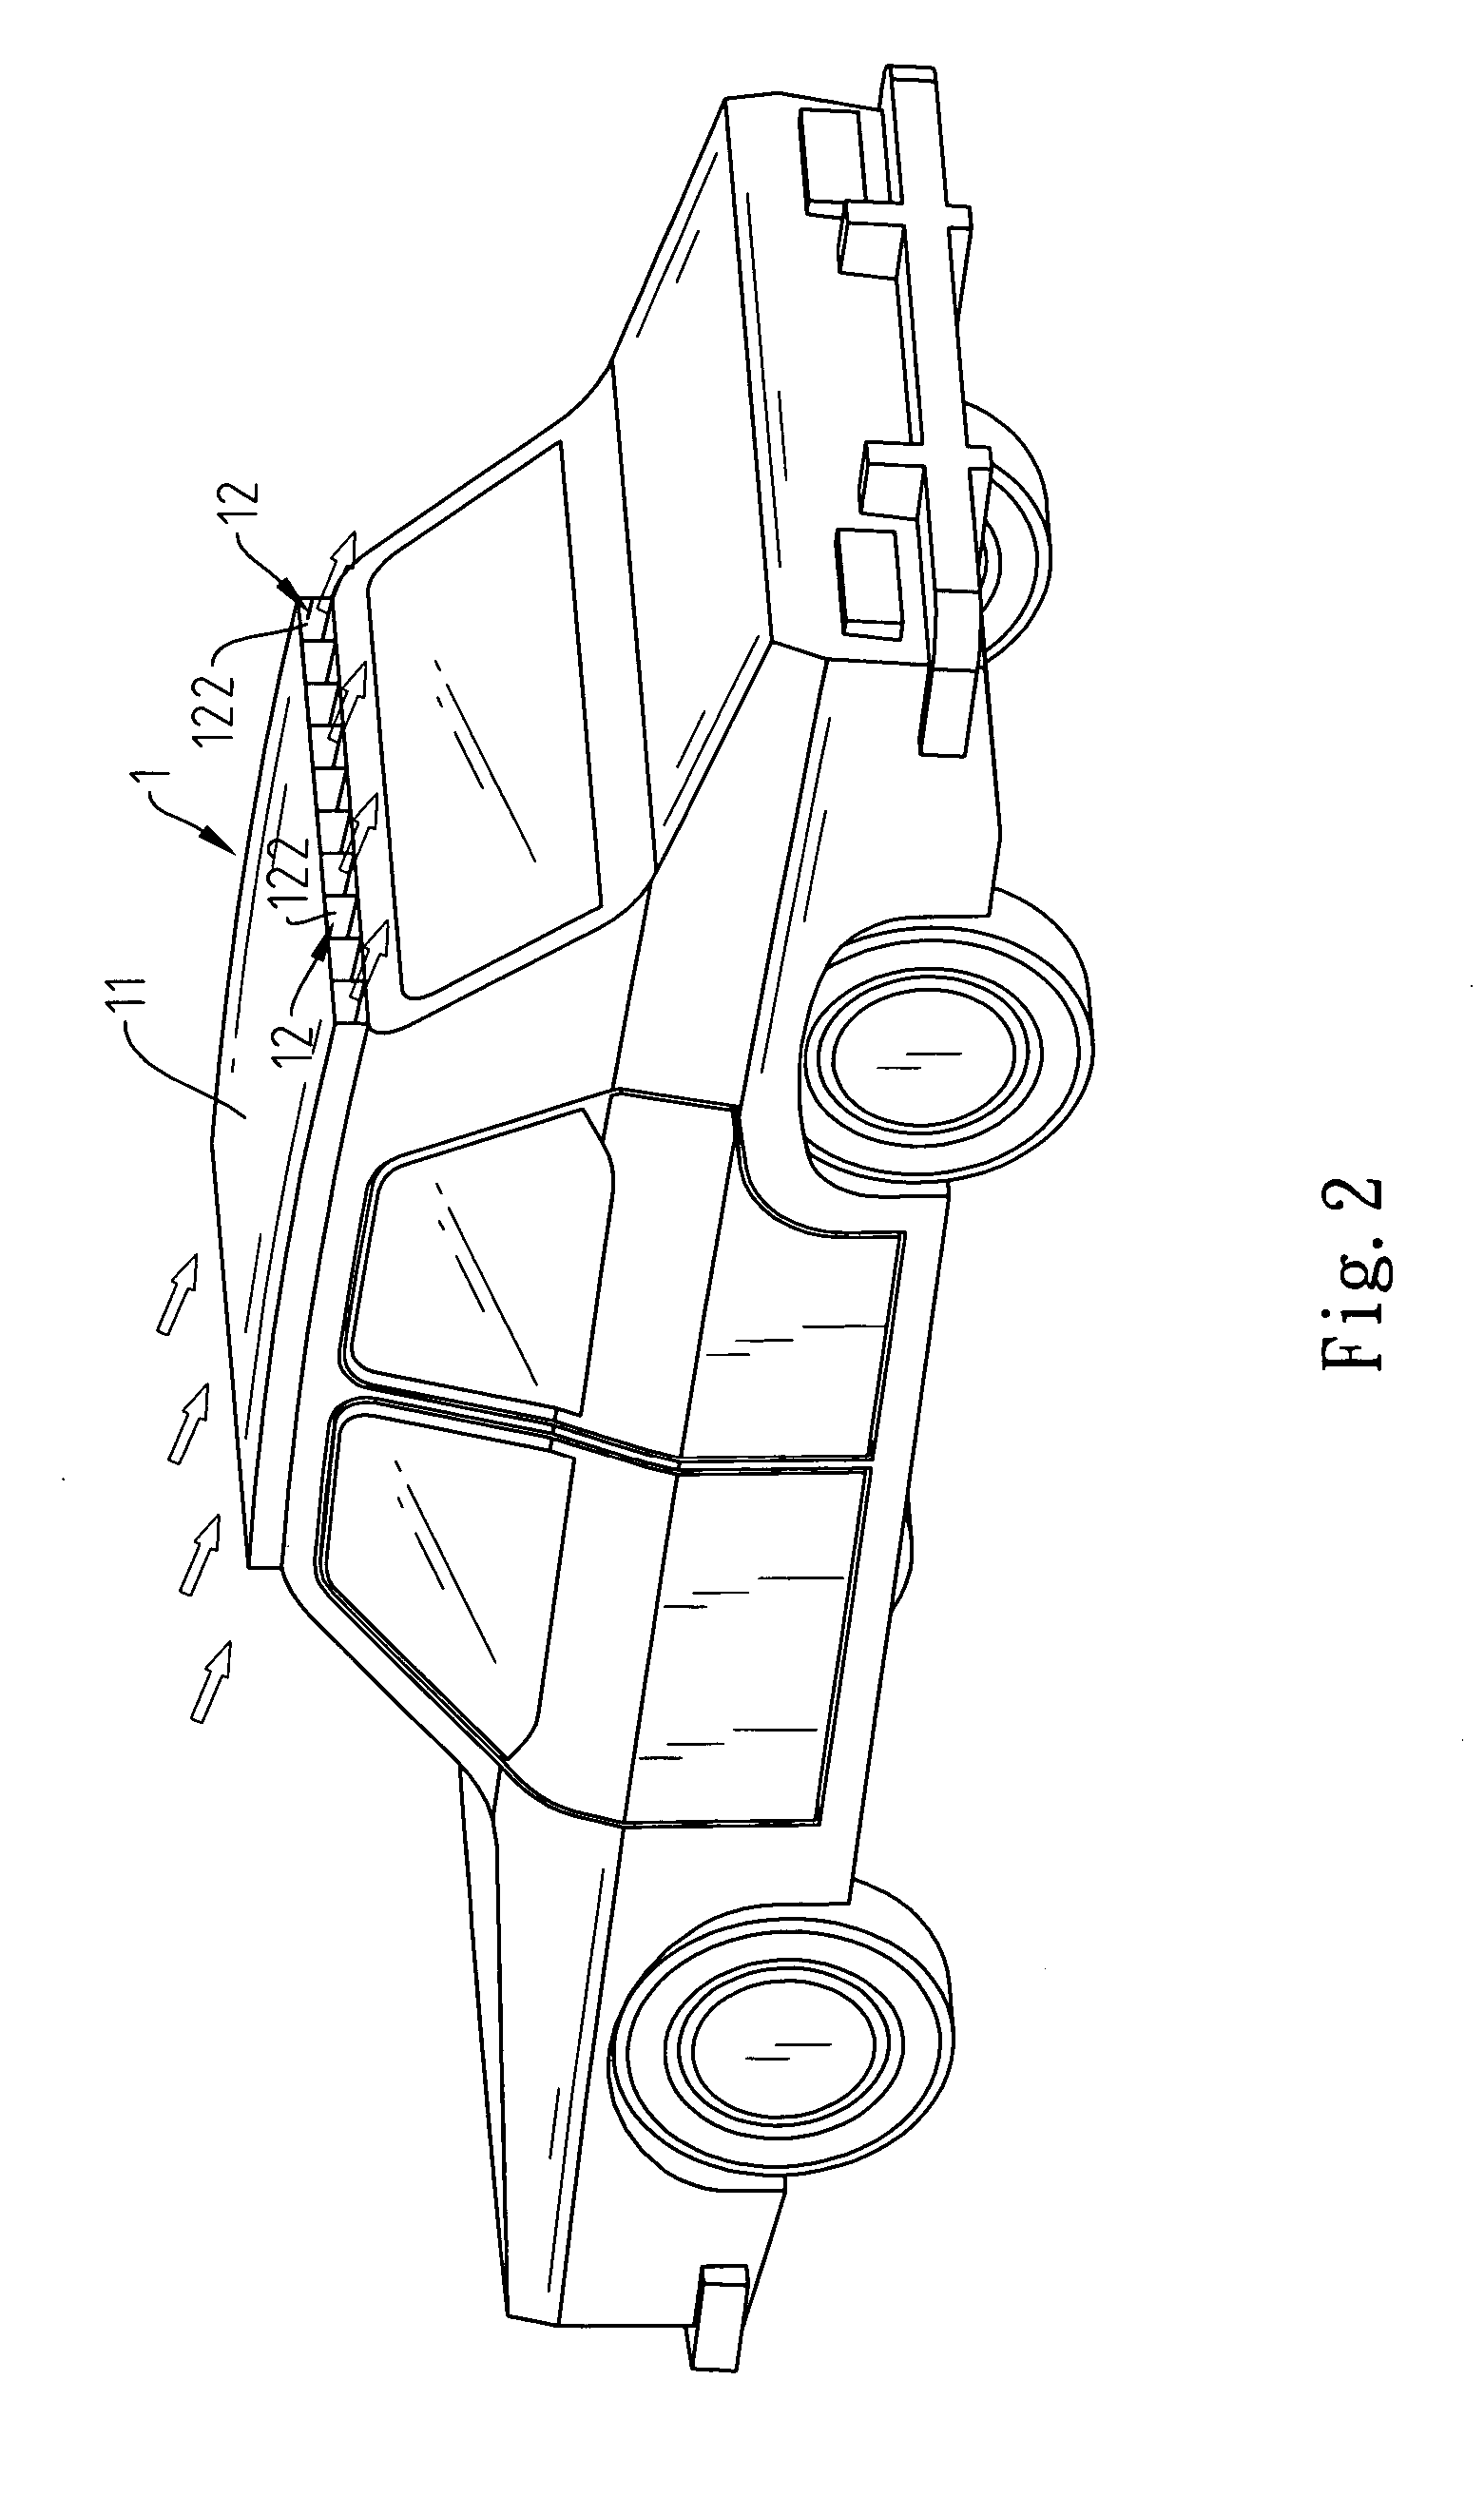 Wind-driven power generation device for electric vehicle